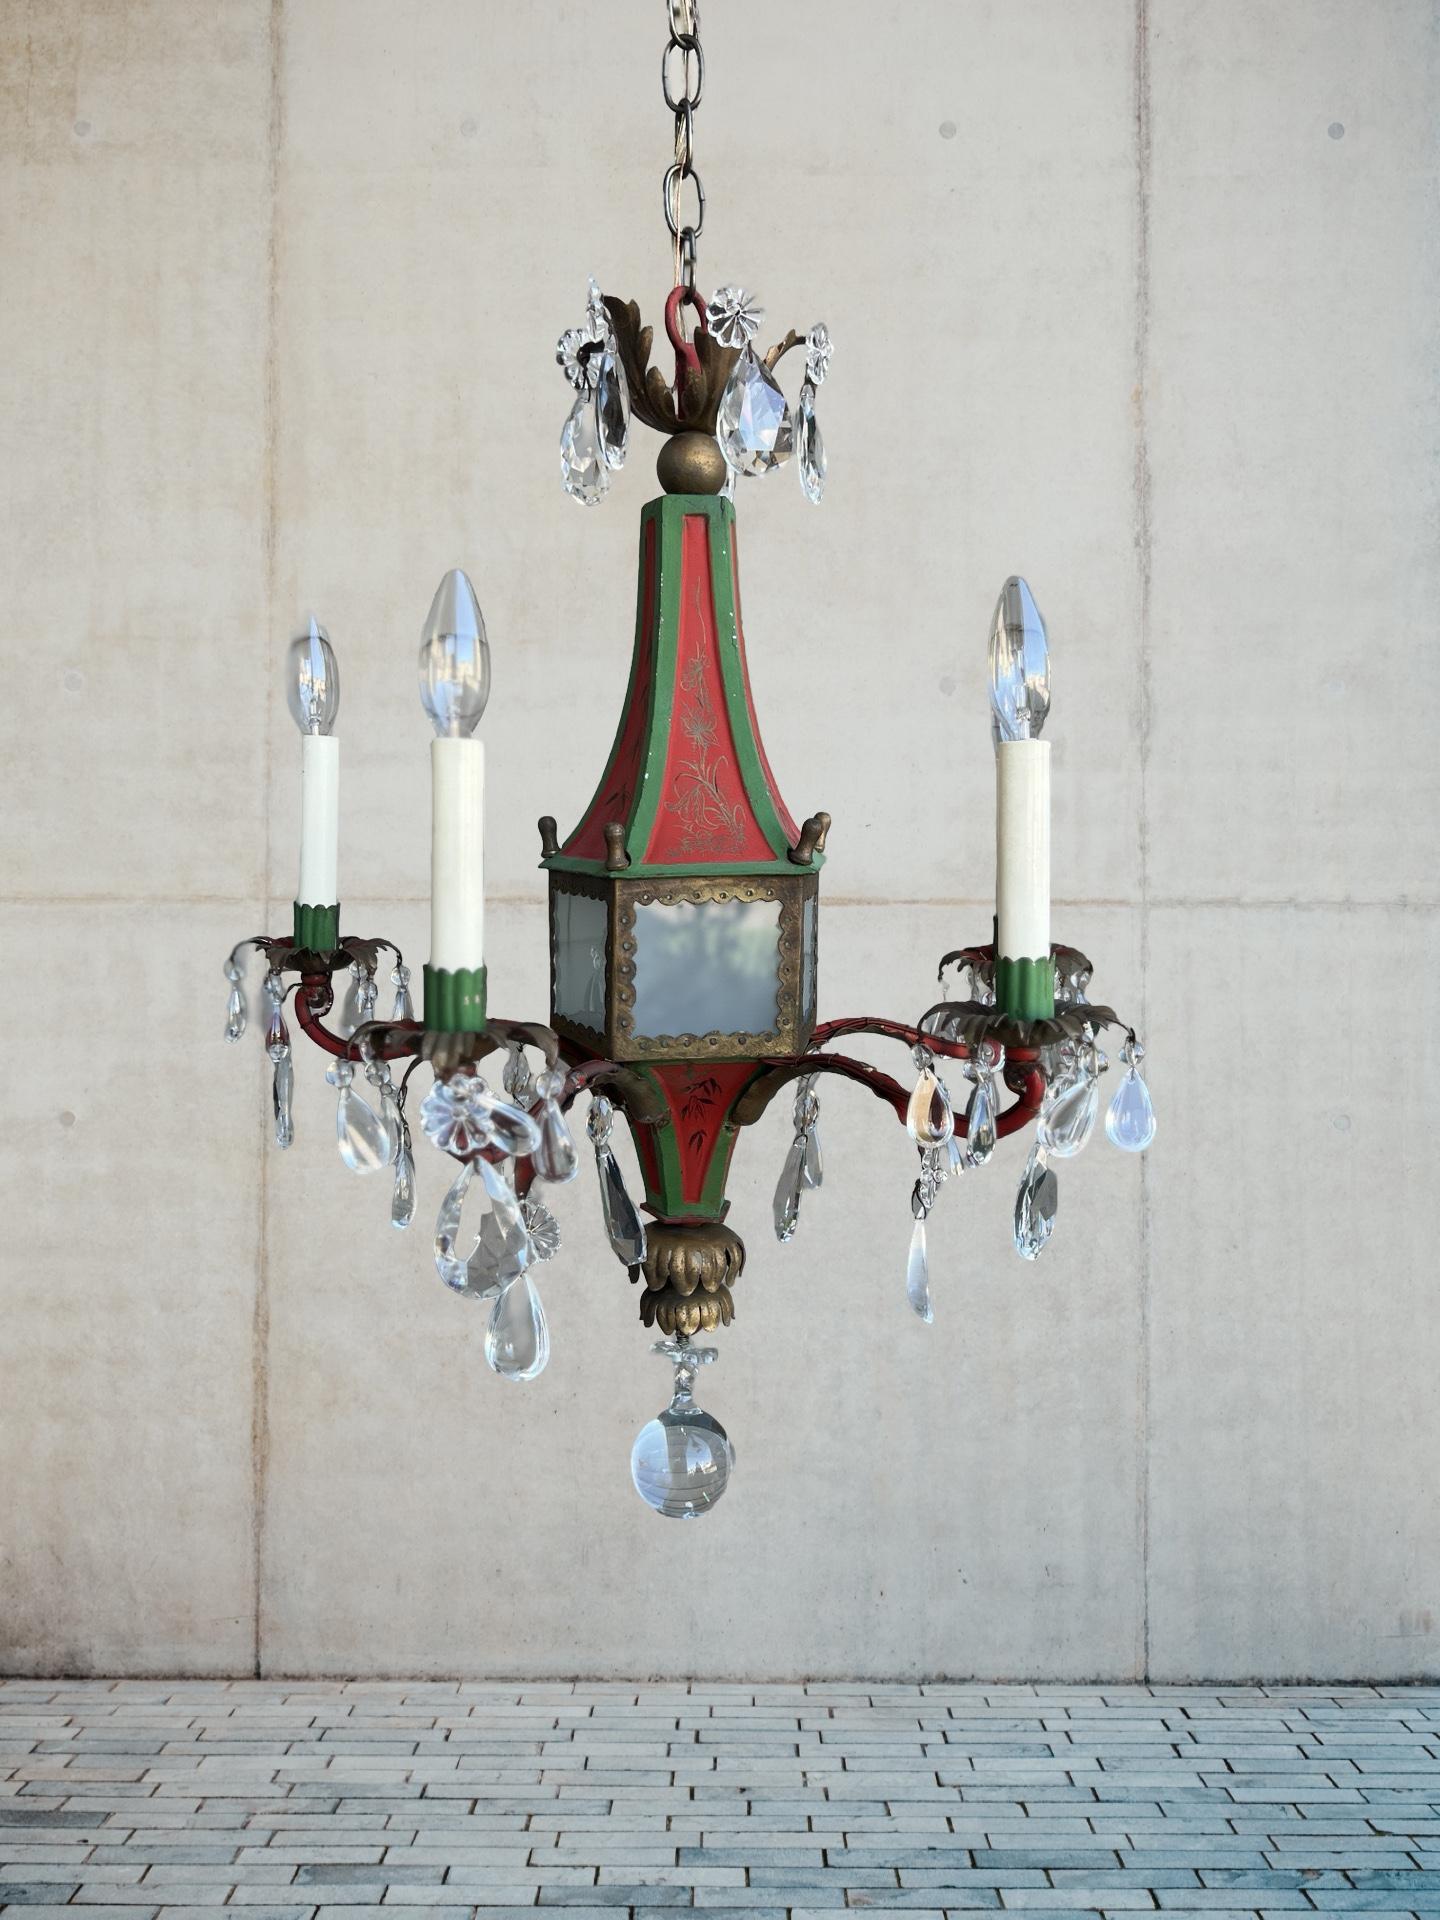 Attributed to E. F. Caldwell Founded in 1895 by Edward F. Caldwell (1851–1914) and Victor F. von Lossberg (1853–1942). 

A Regency Brighton Pavilion style 5-Light chandelier with a chinoiserie (red & green) painted tin body, scrolled iron arms